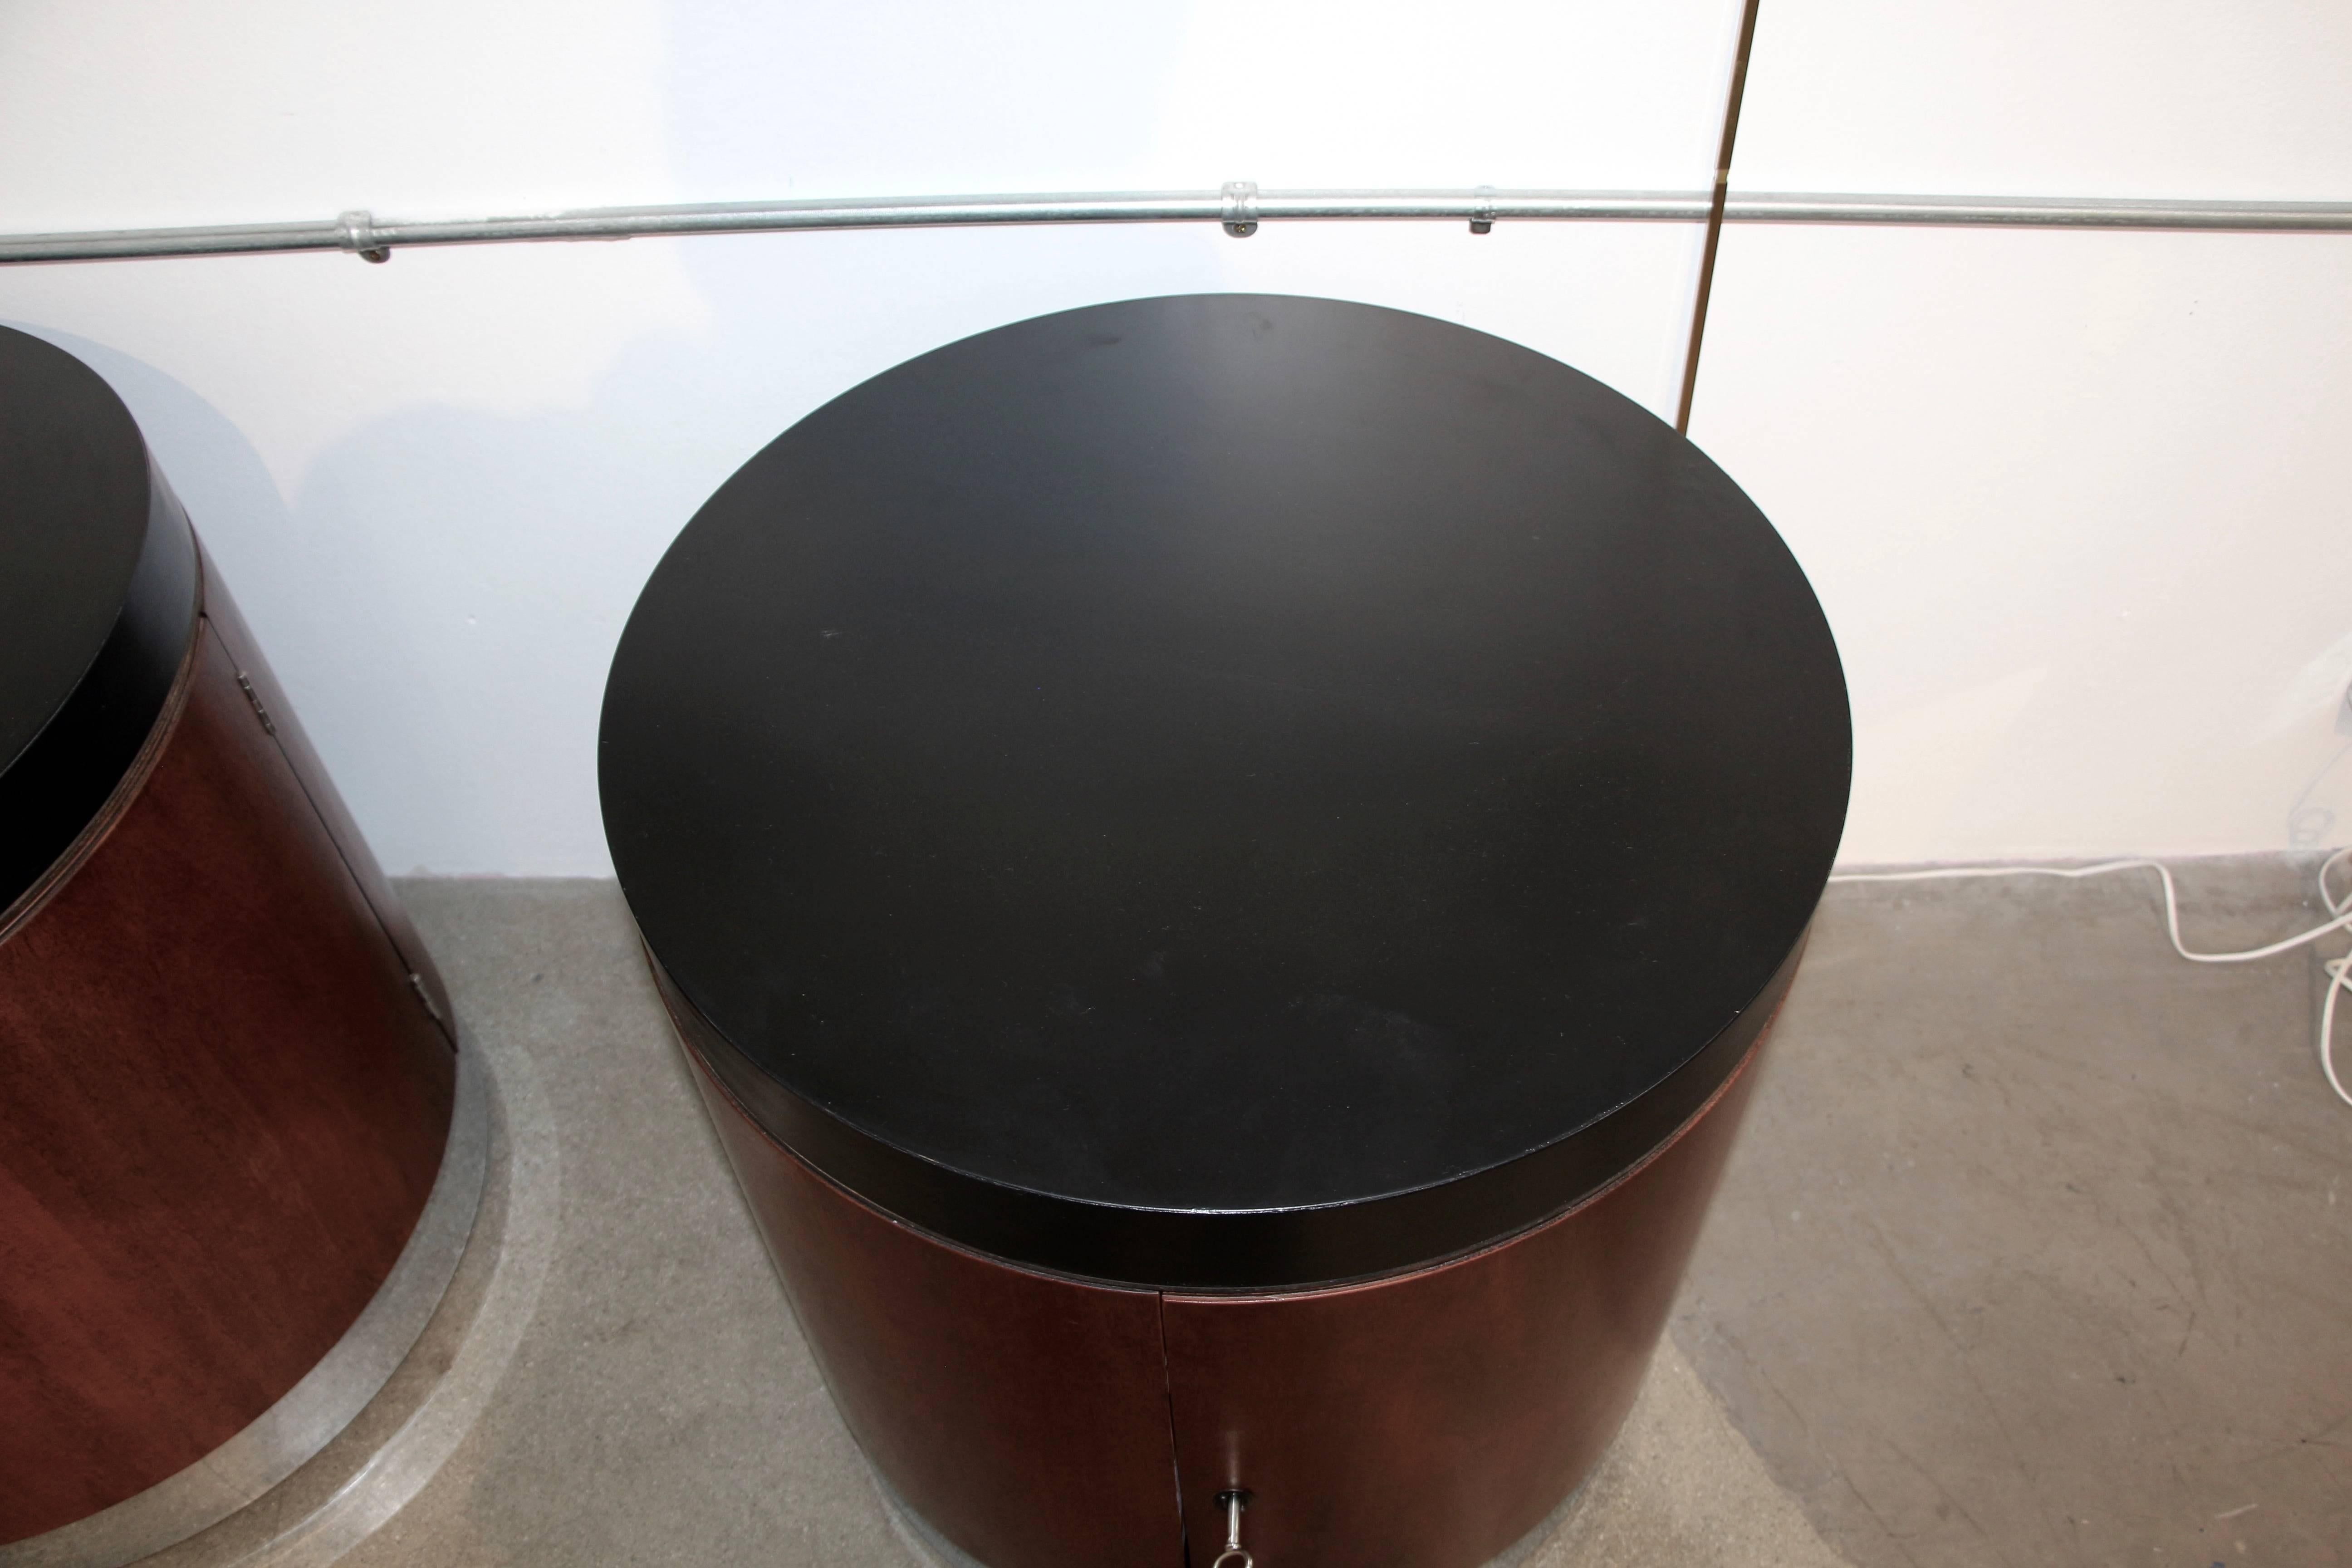 A nice pair of 1980s vintage Polo by Ralph Lauren end tables or nightstands. These circular tables are lockable and there is one key for both. They bear the Polo Ralph Lauren brass tag. Tops are painted black with nicely grained wood middles and